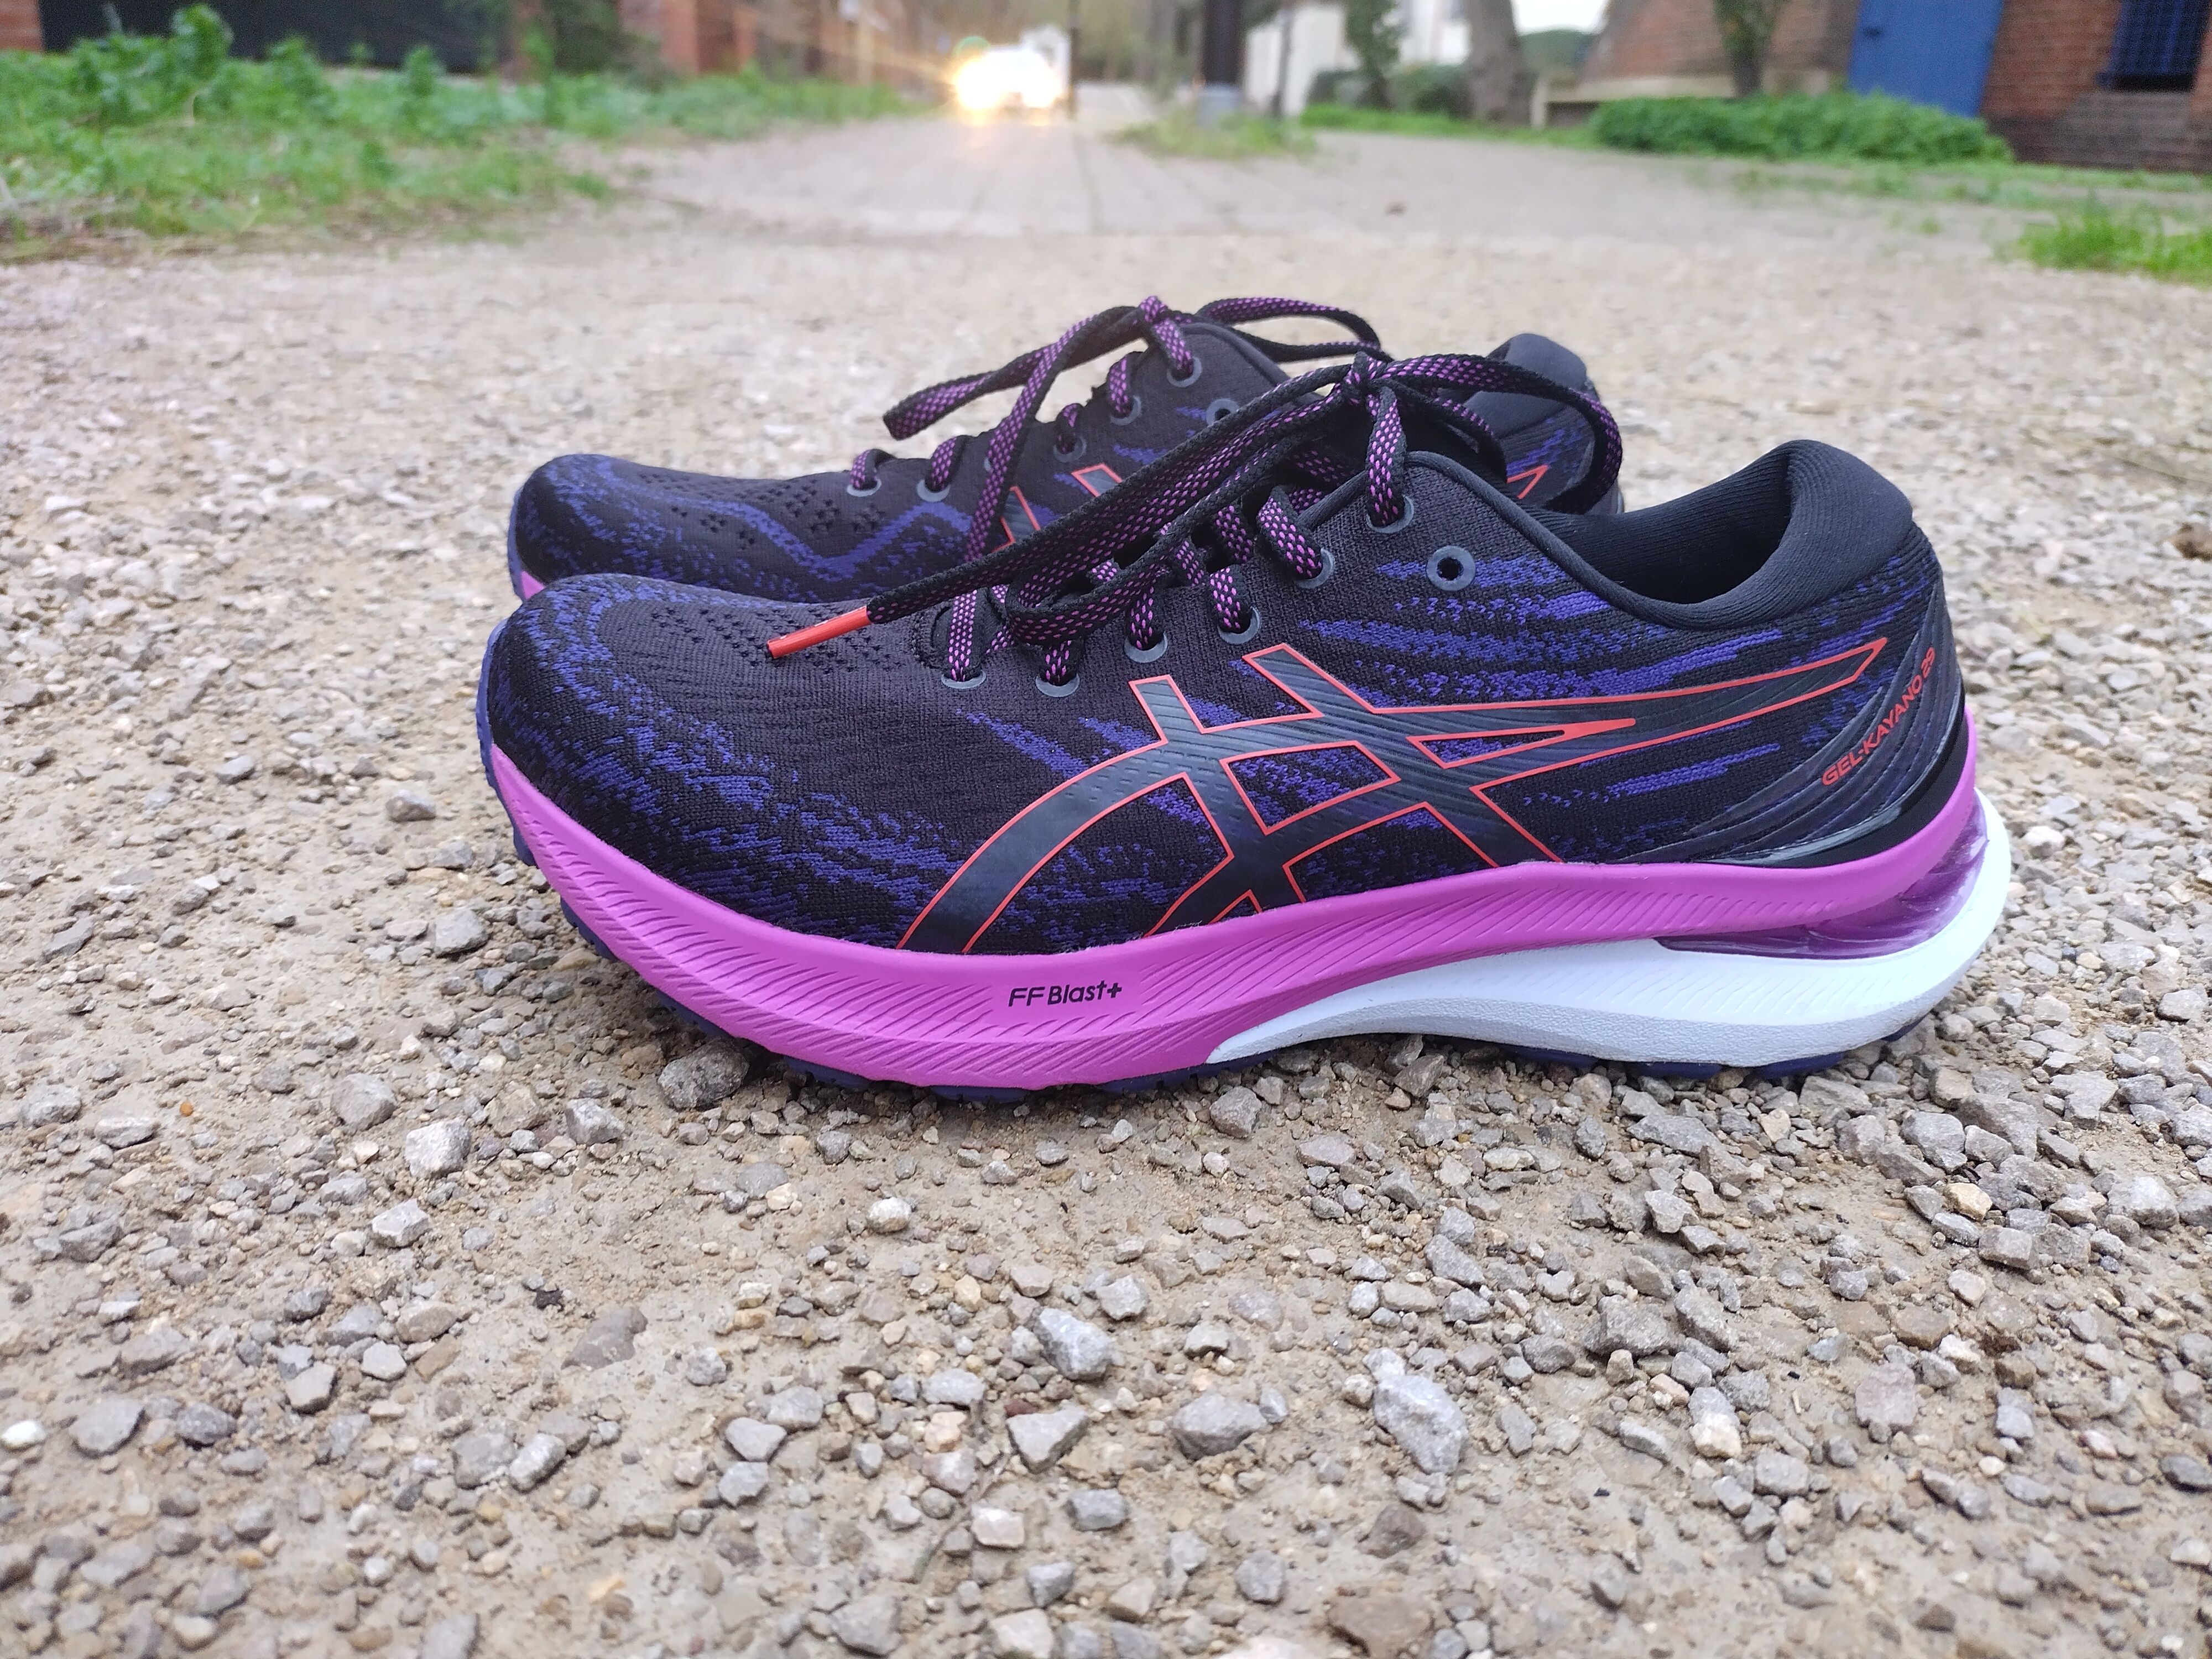 Asics Gel-Kayano 29 review: RW tried and tested